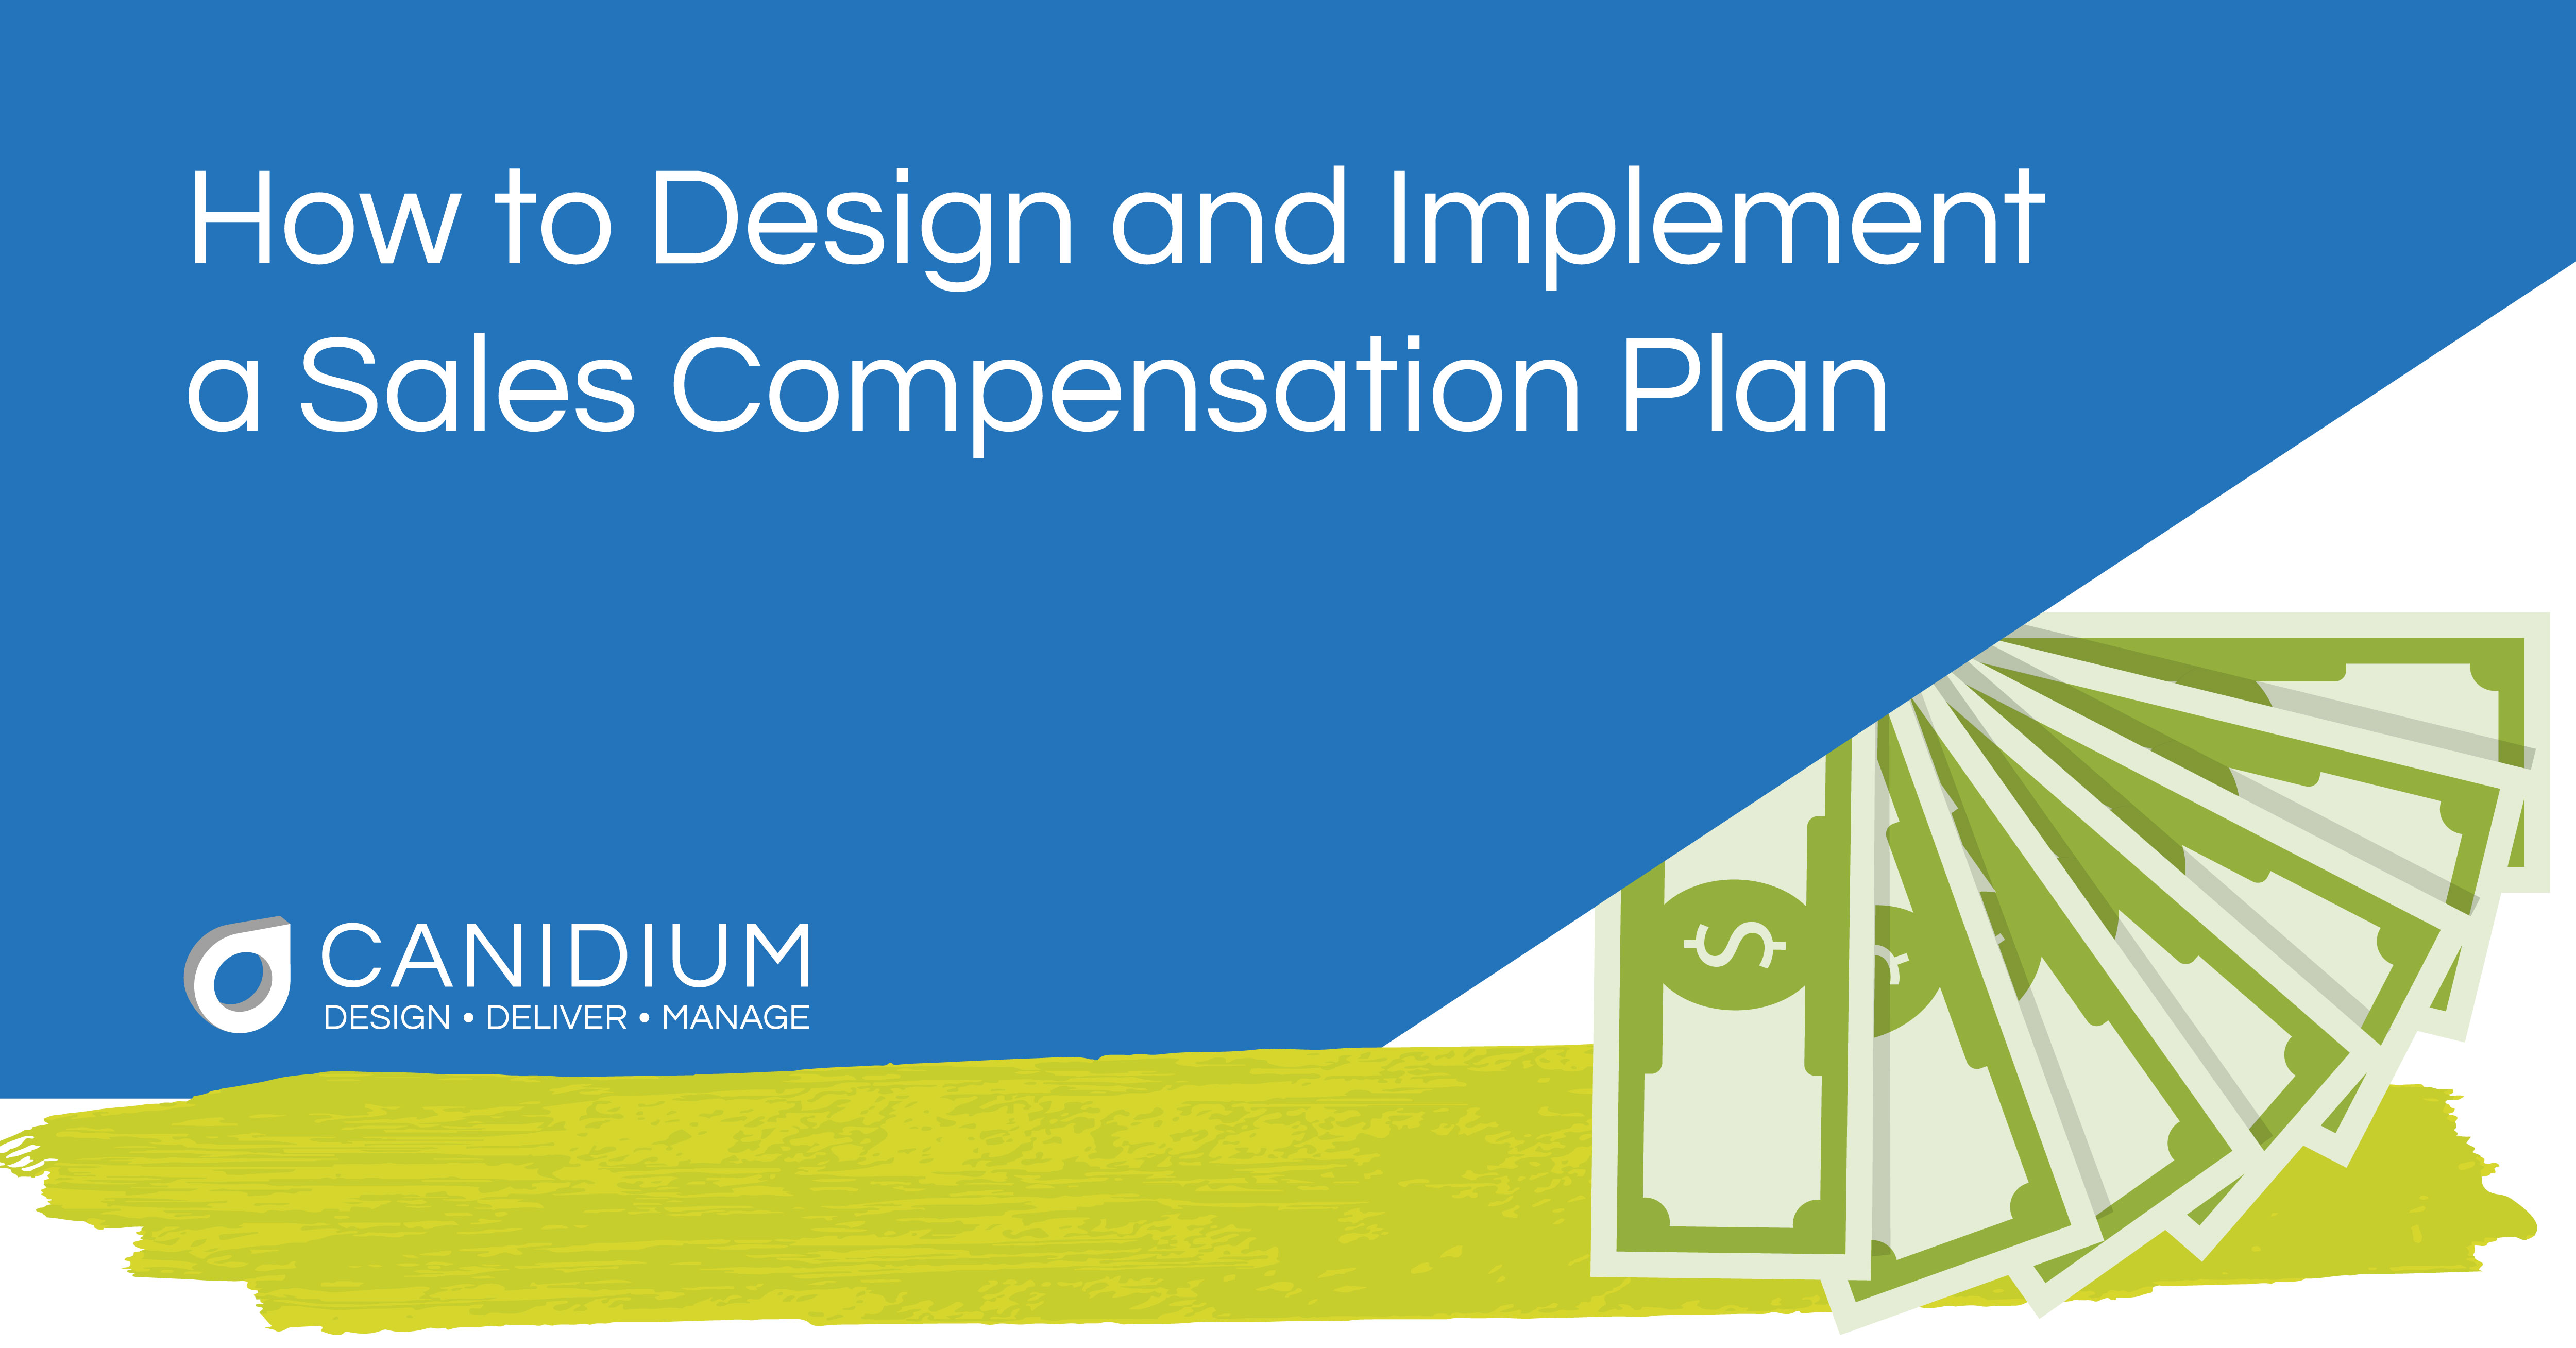 How to Design and Implement a Sales Compensation Plan